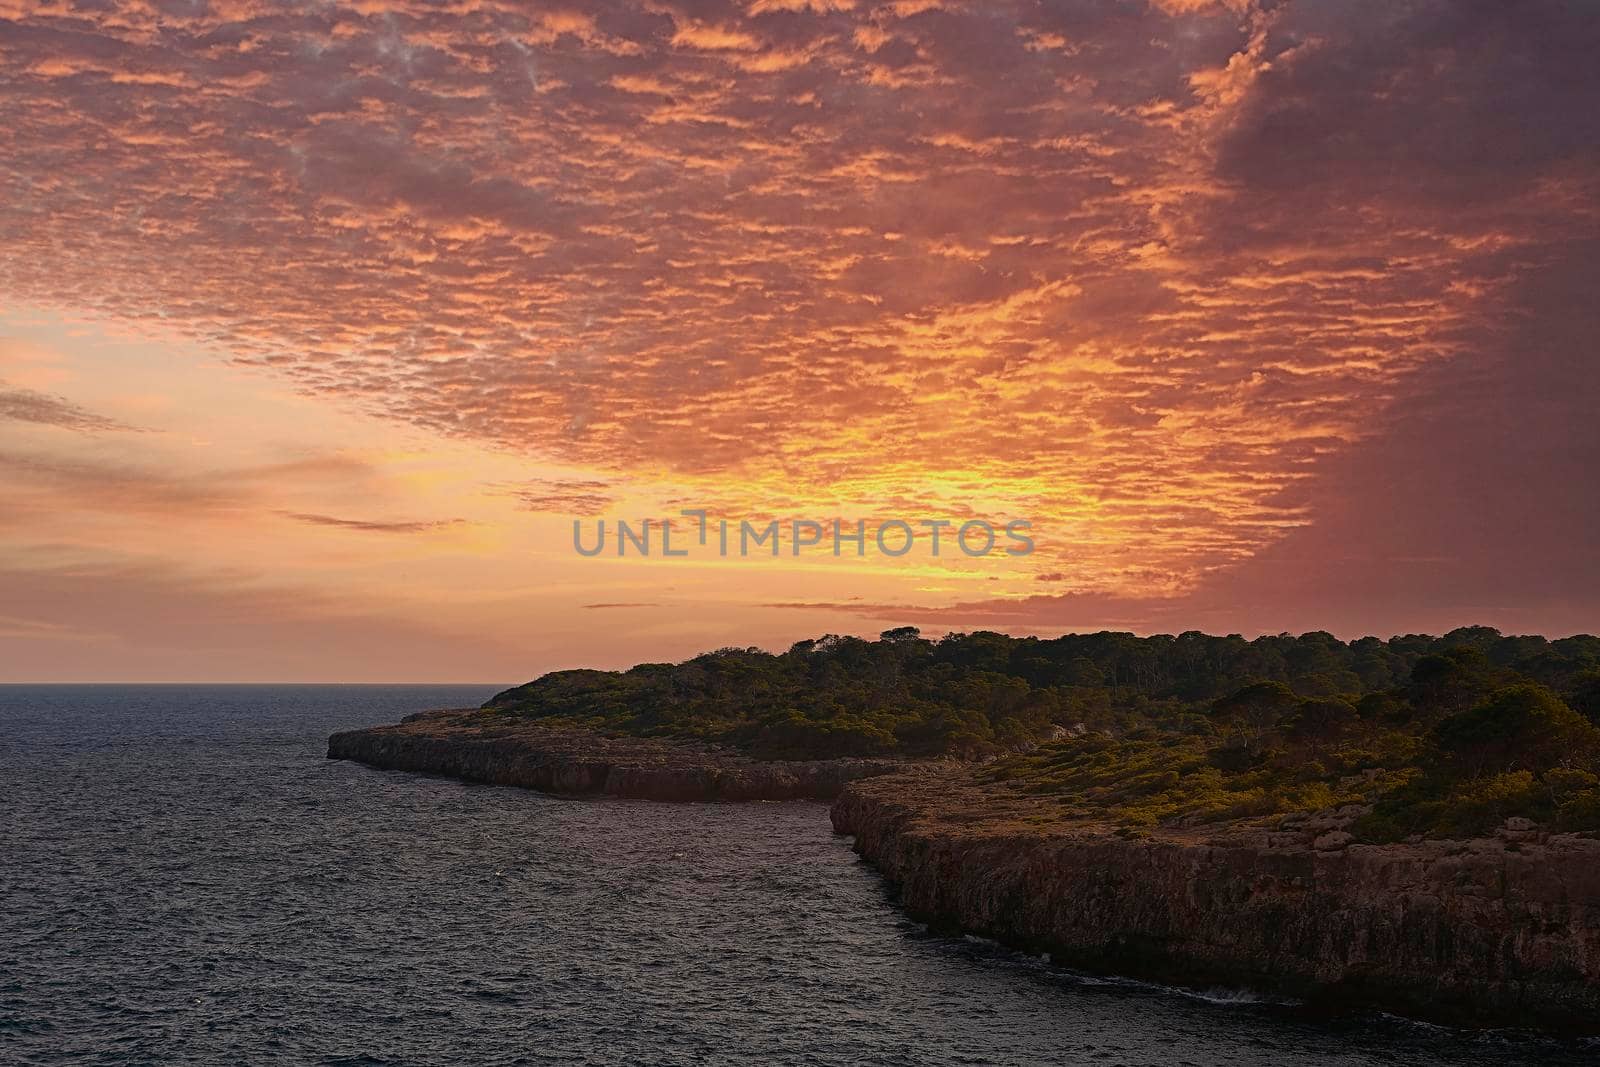 Sunset or sunrise on the coast with cliffs. Orange sky with clouds, no people